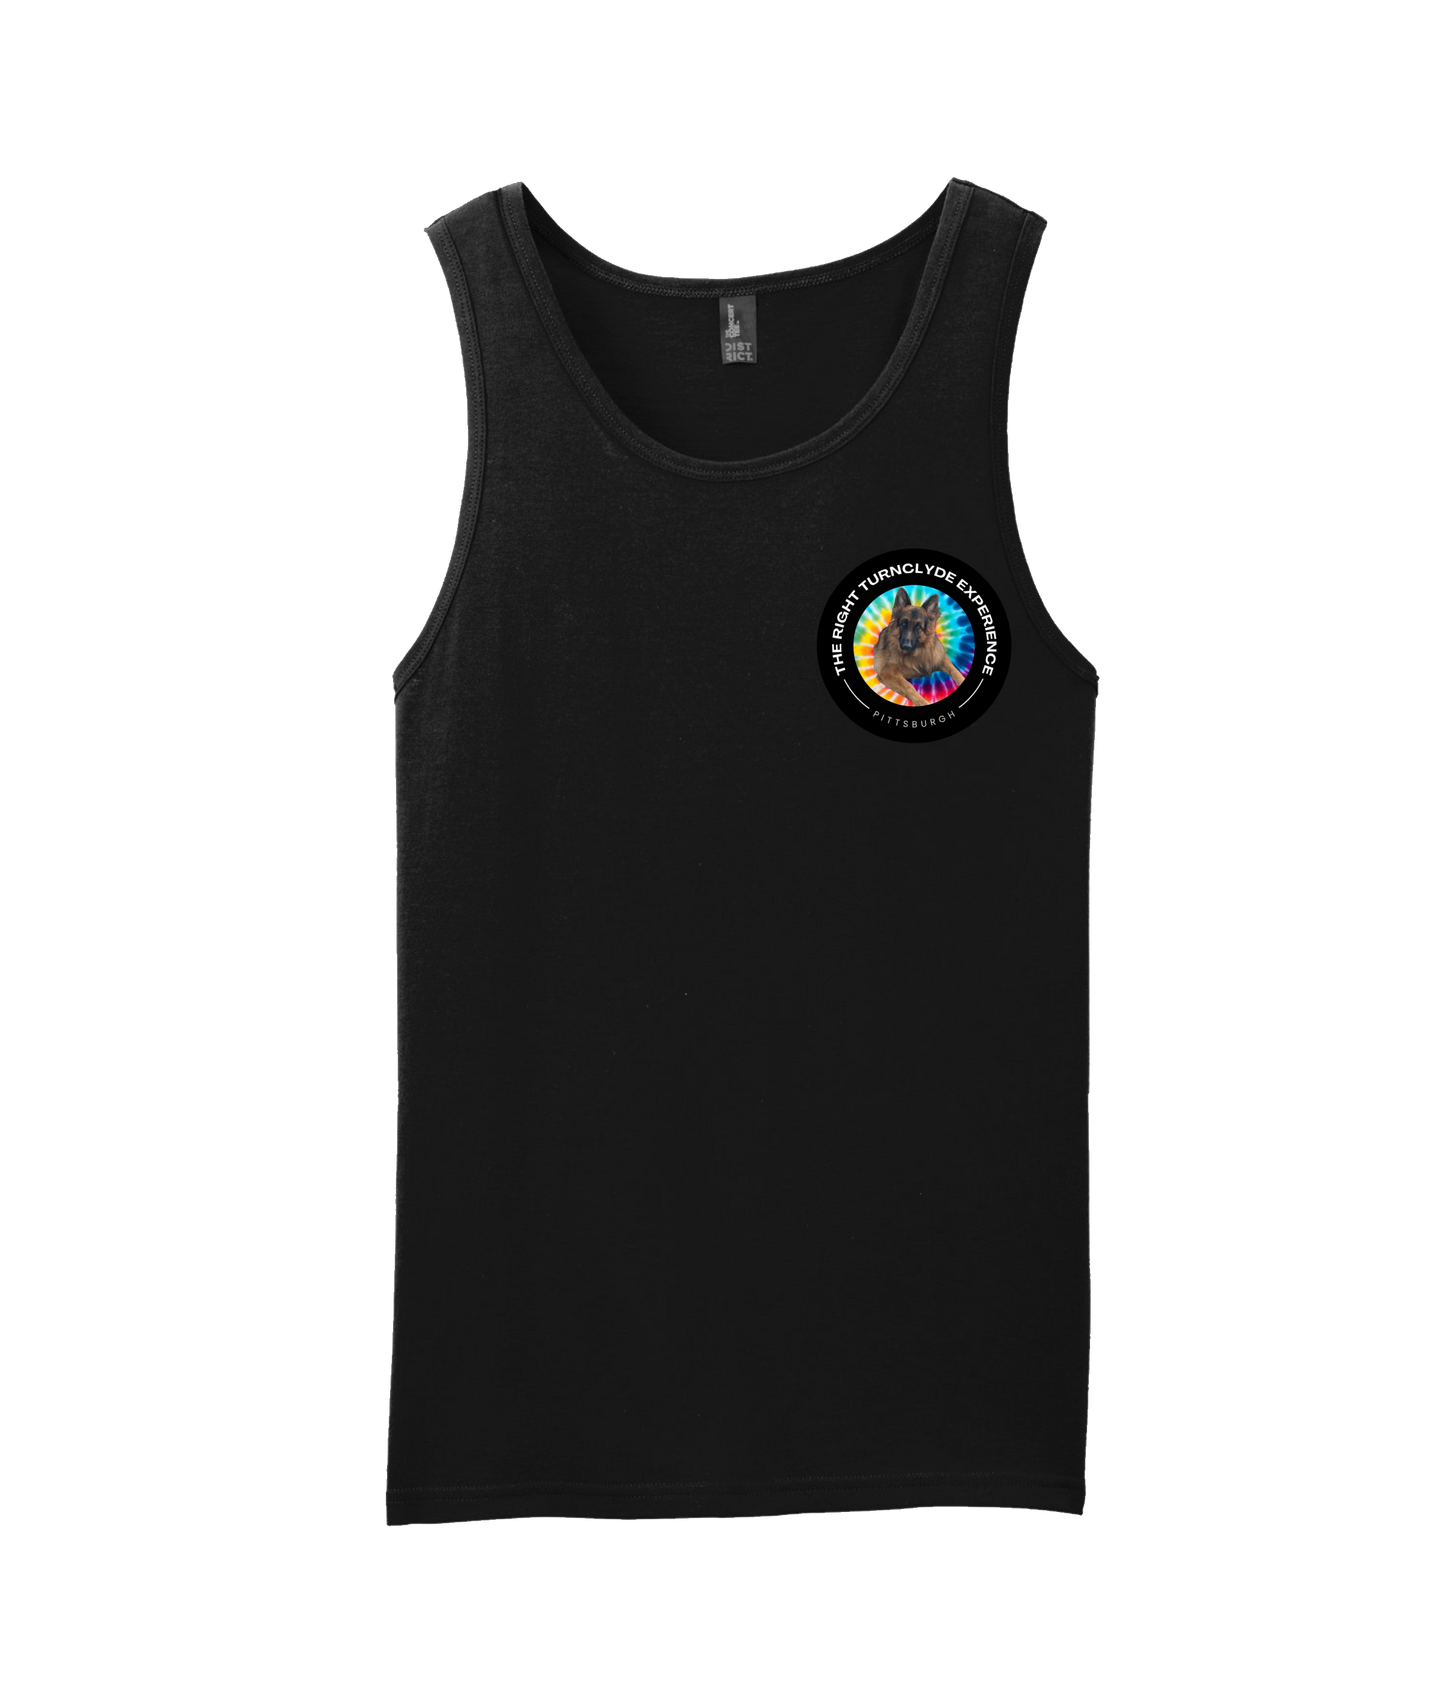 Right TurnClyde "Brucie Gear" Merchandise - Right TurnClyde "Brucie Gear" Merchandise - Black Tank Top